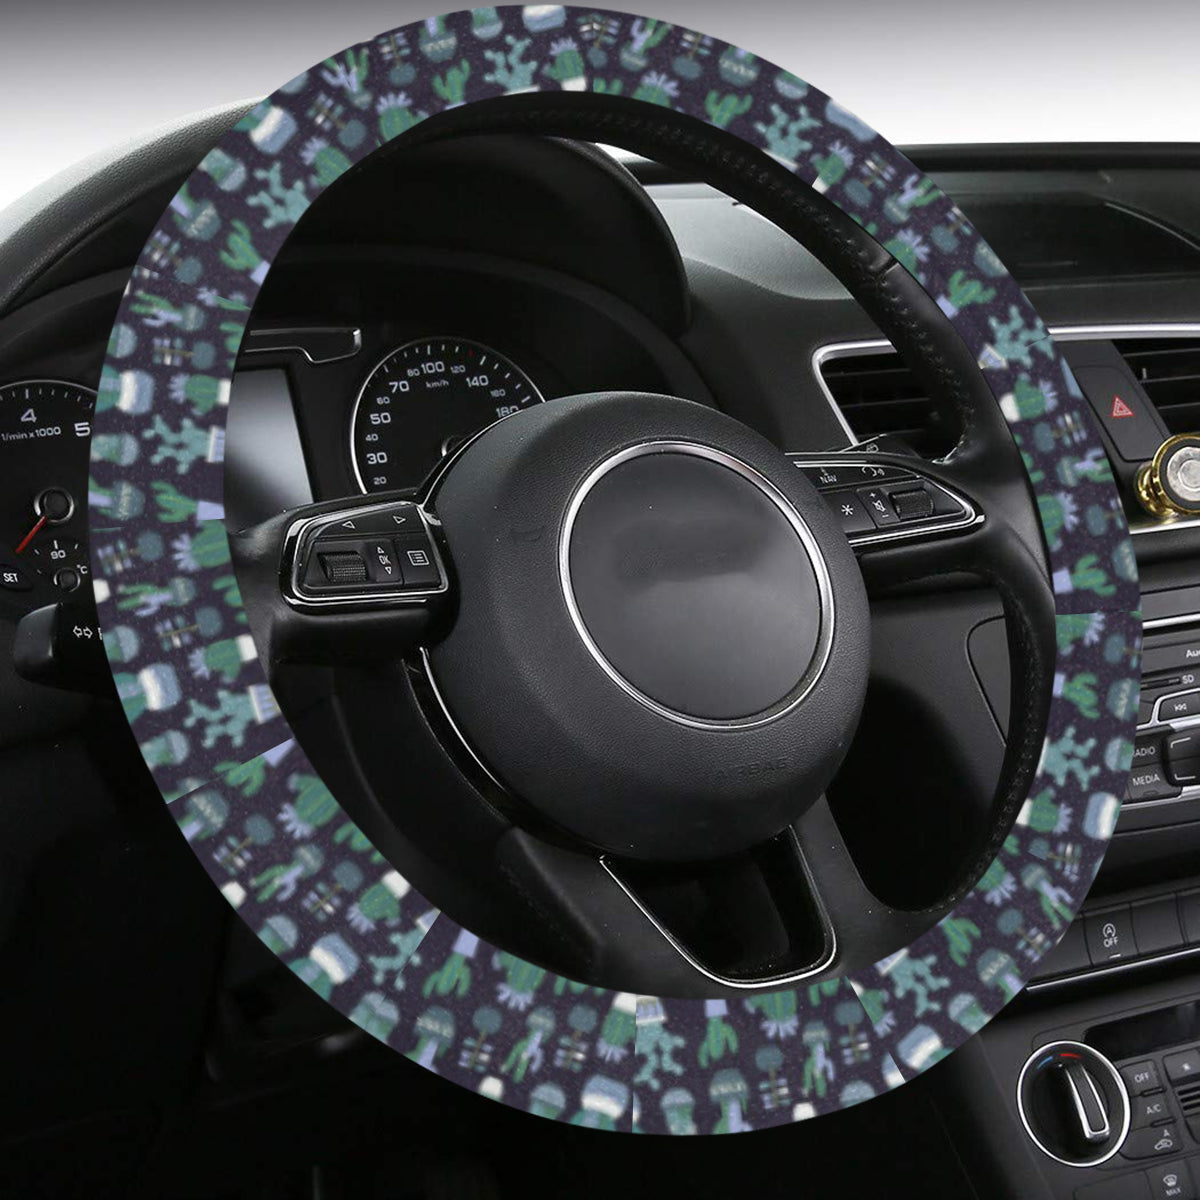 Cactus Steering Wheel Cover with Anti-Slip Insert, Green Succulent Plant Car Auto Wrap Protector Accessories Starcove Fashion